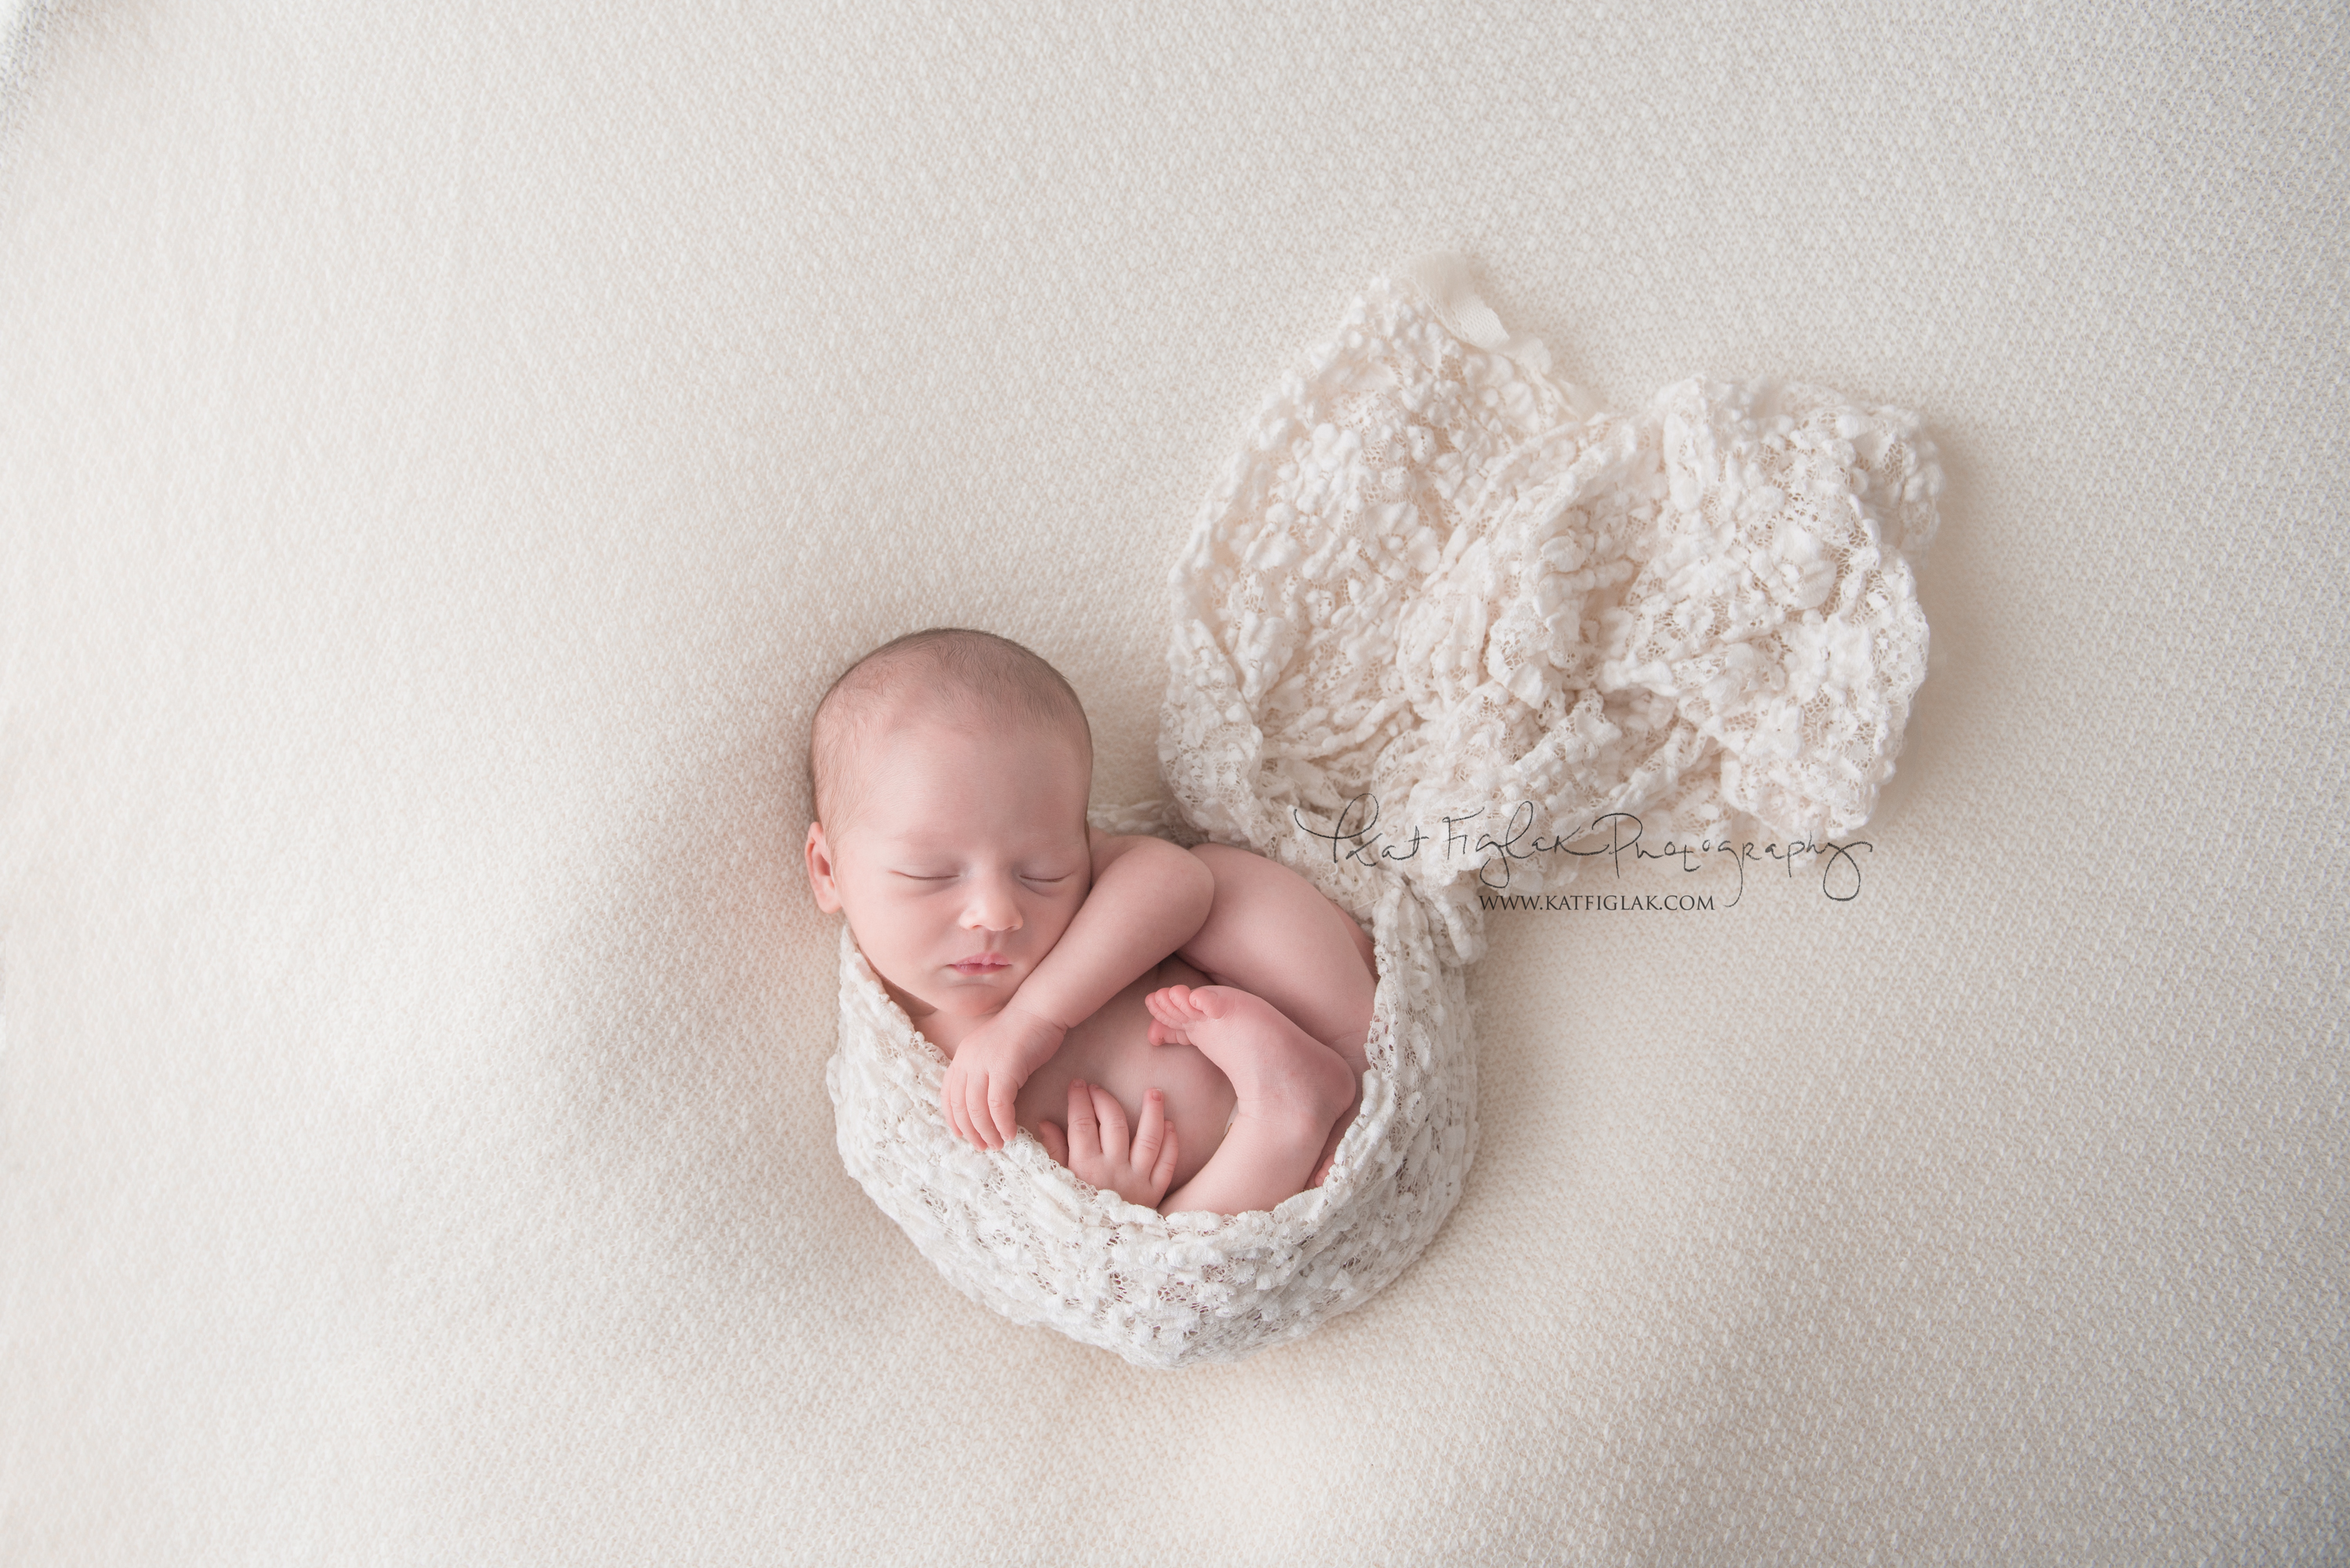 newborn baby girl wrapped in white lace and sleeping on white knit wrap